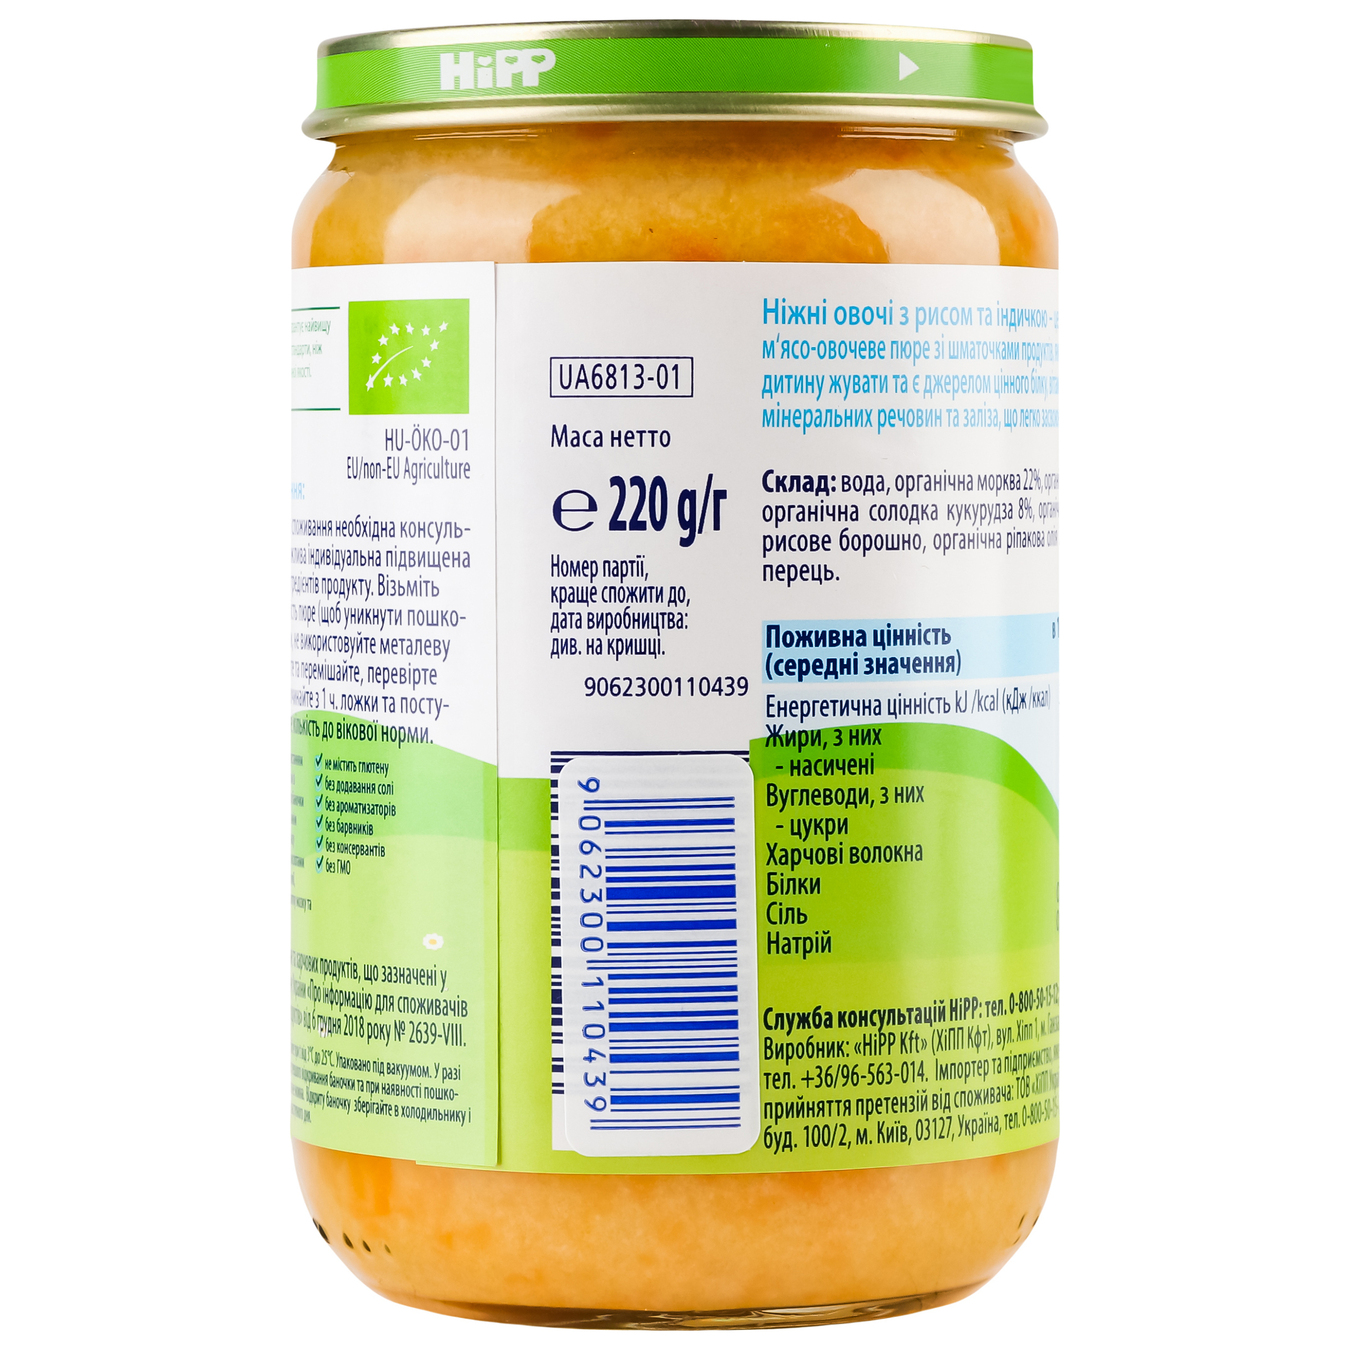 Baby puree HiPP Turkey in vegetables with rice for 12+ month old babies glass jar 220g Hungary 5